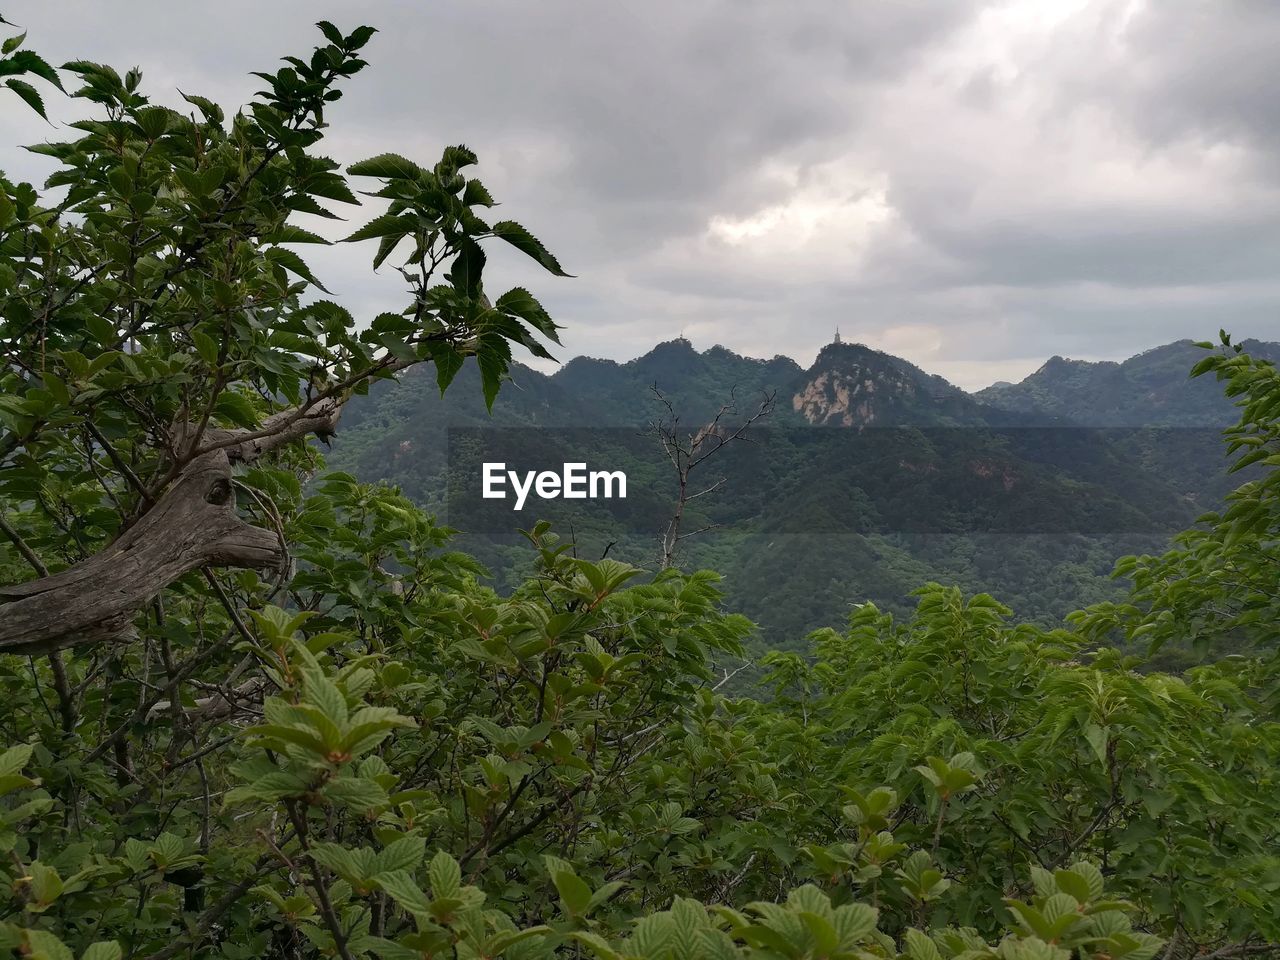 SCENIC VIEW OF TREE MOUNTAINS AGAINST SKY